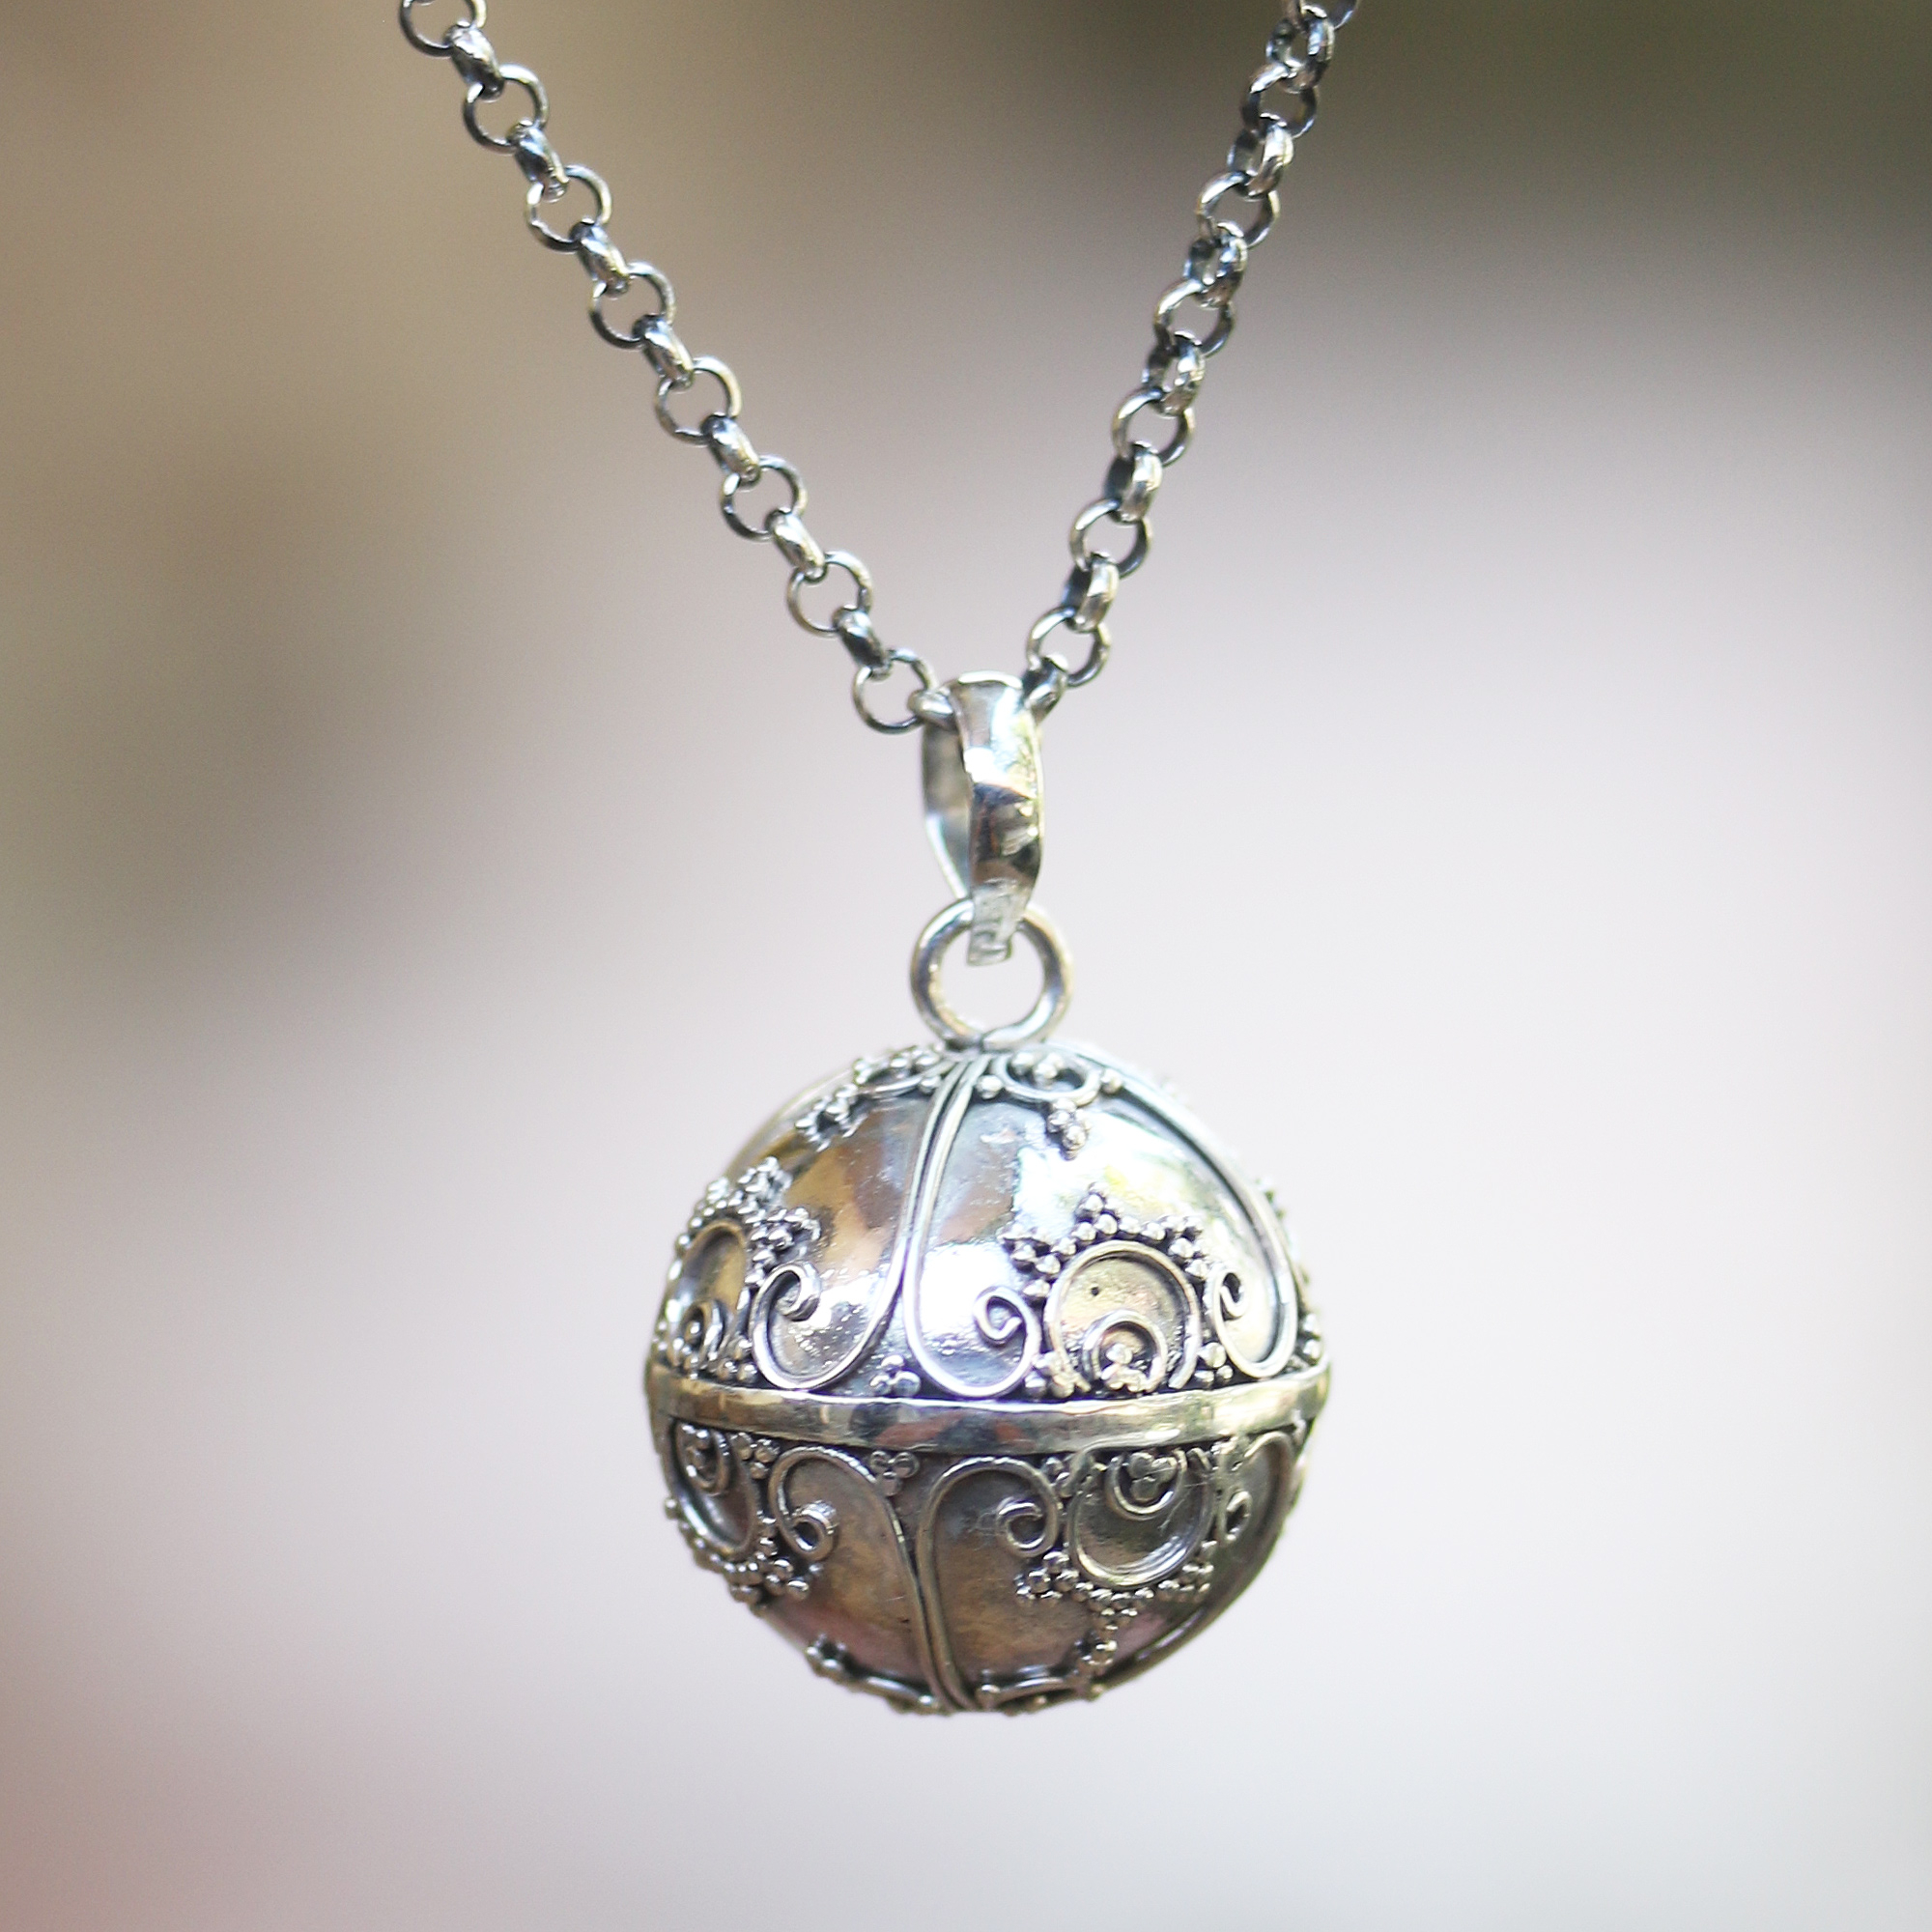 Details about   Sterling Silver Square Pillow Harmony Ball Pendant HB-126 